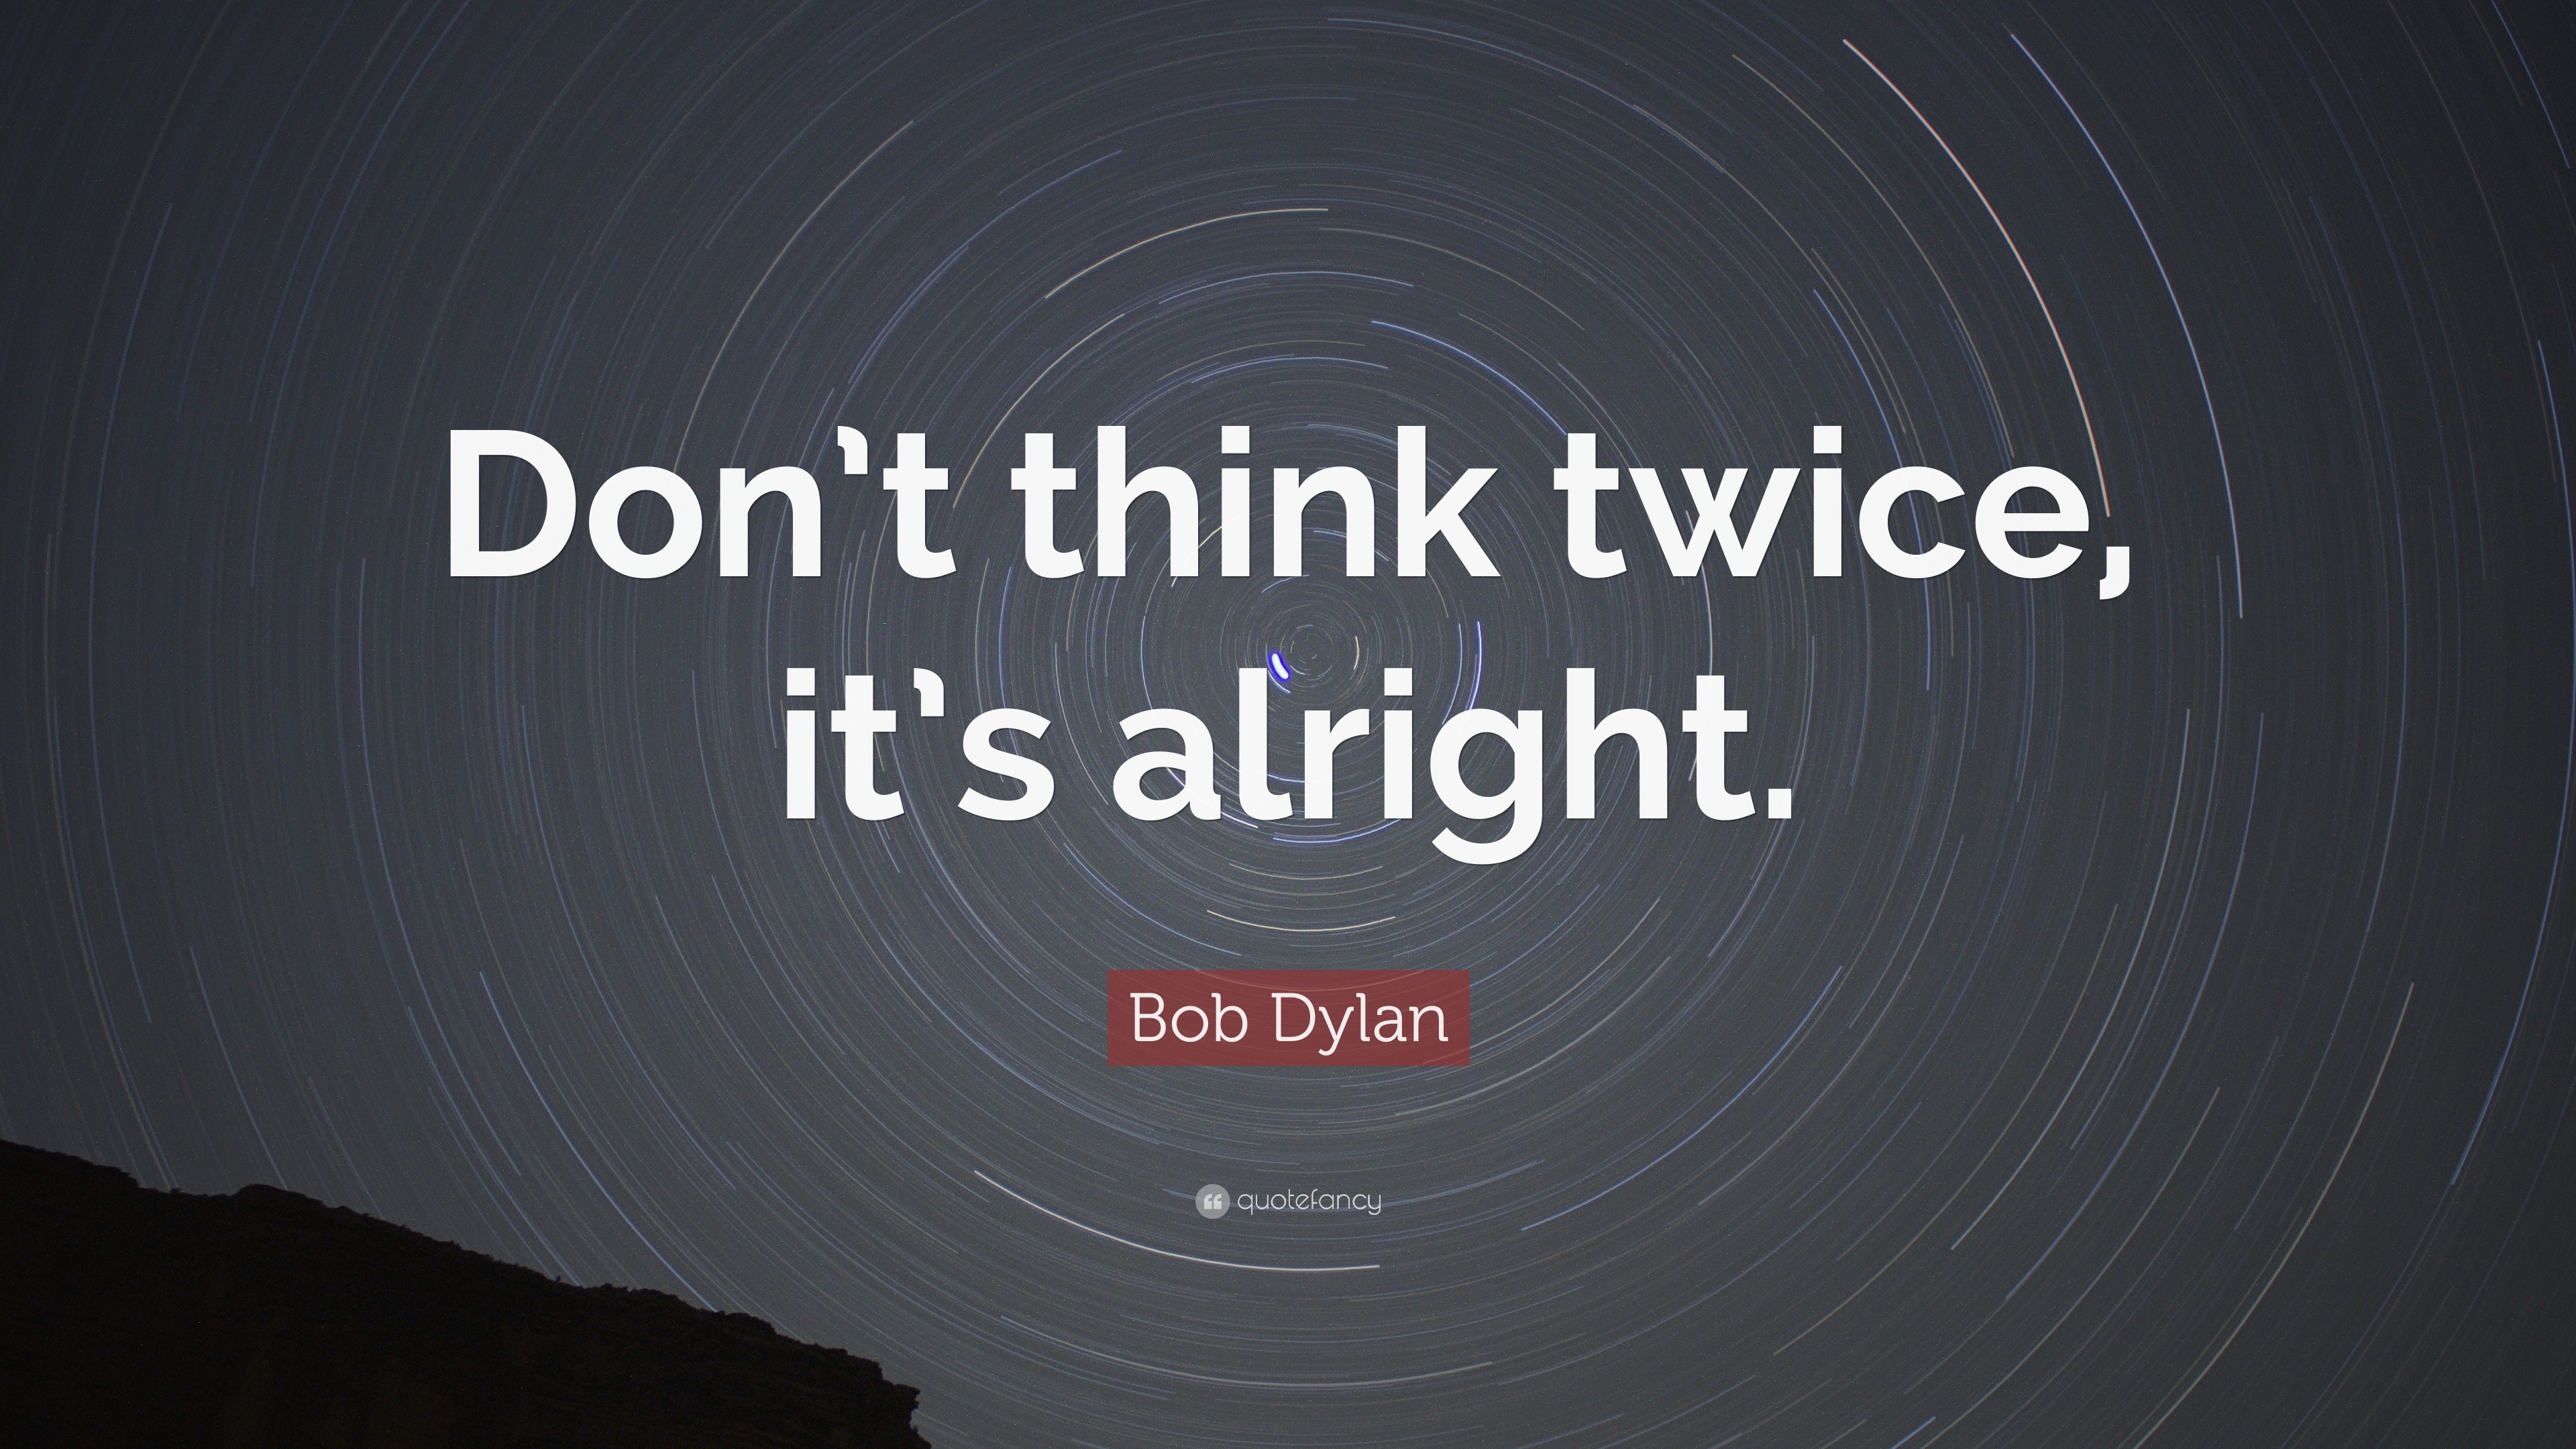 https://quotefancy.com/media/wallpaper/3840x2160/179284-Bob-Dylan-Quote-Don-t-think-twice-it-s-alright.jpg